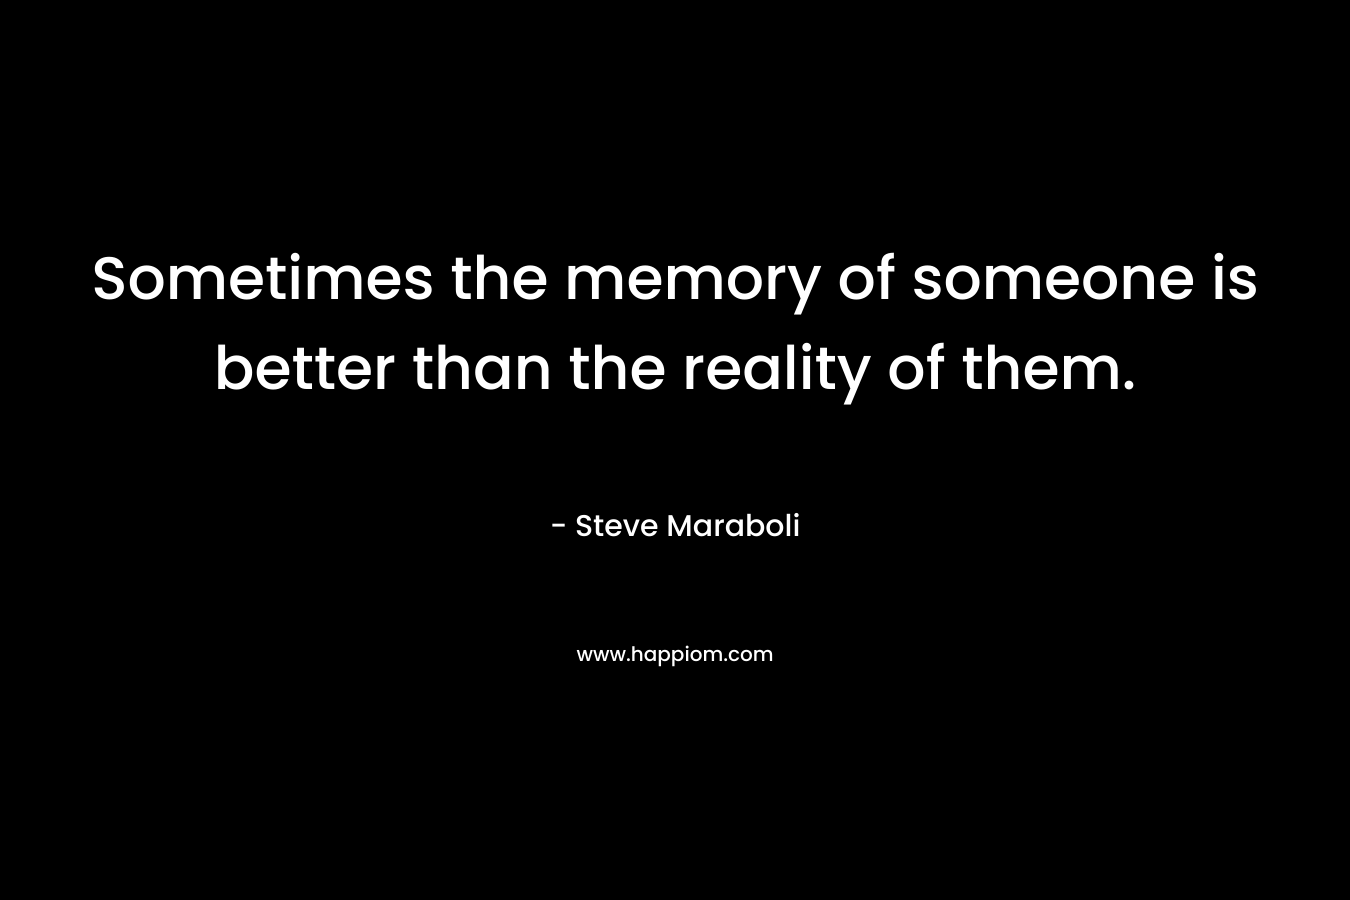 Sometimes the memory of someone is better than the reality of them.